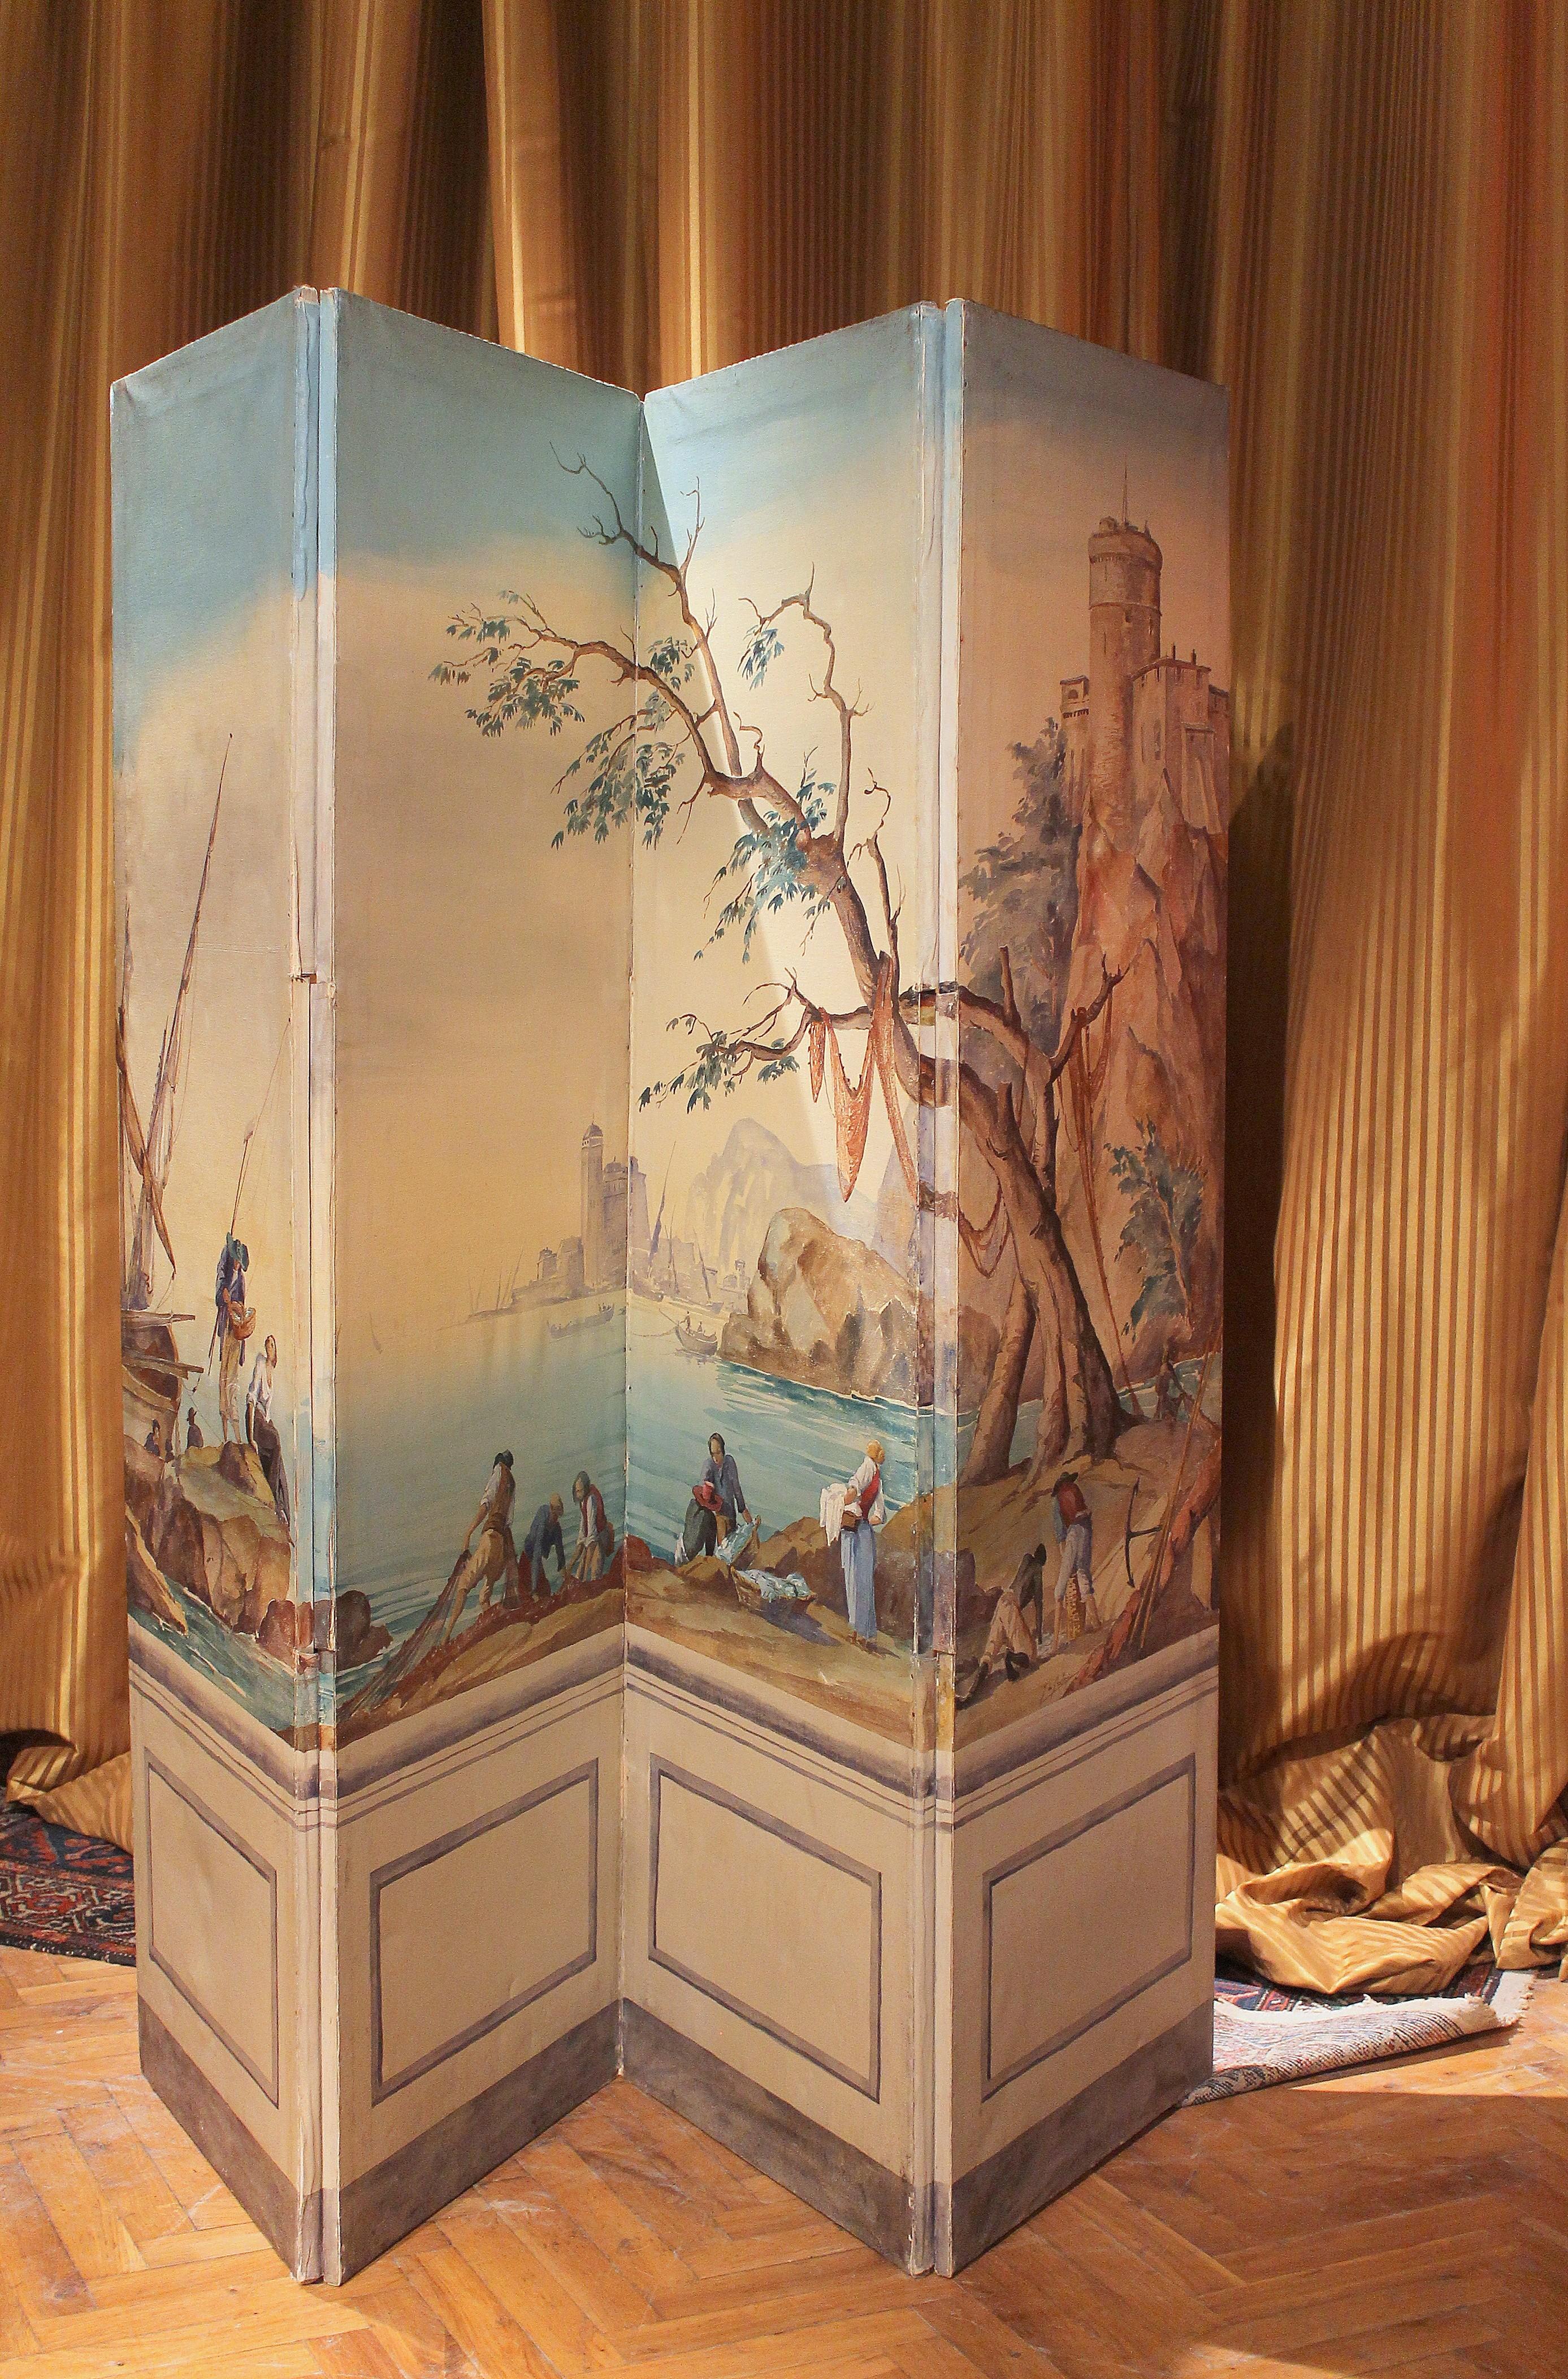 This French early 20th Century folding screen is made up of four canvases entirely painted with textured tempera featuring a marine landscape view in full Louis XV style, reminiscences of romantic atmospheres with certain moods from the past.
The